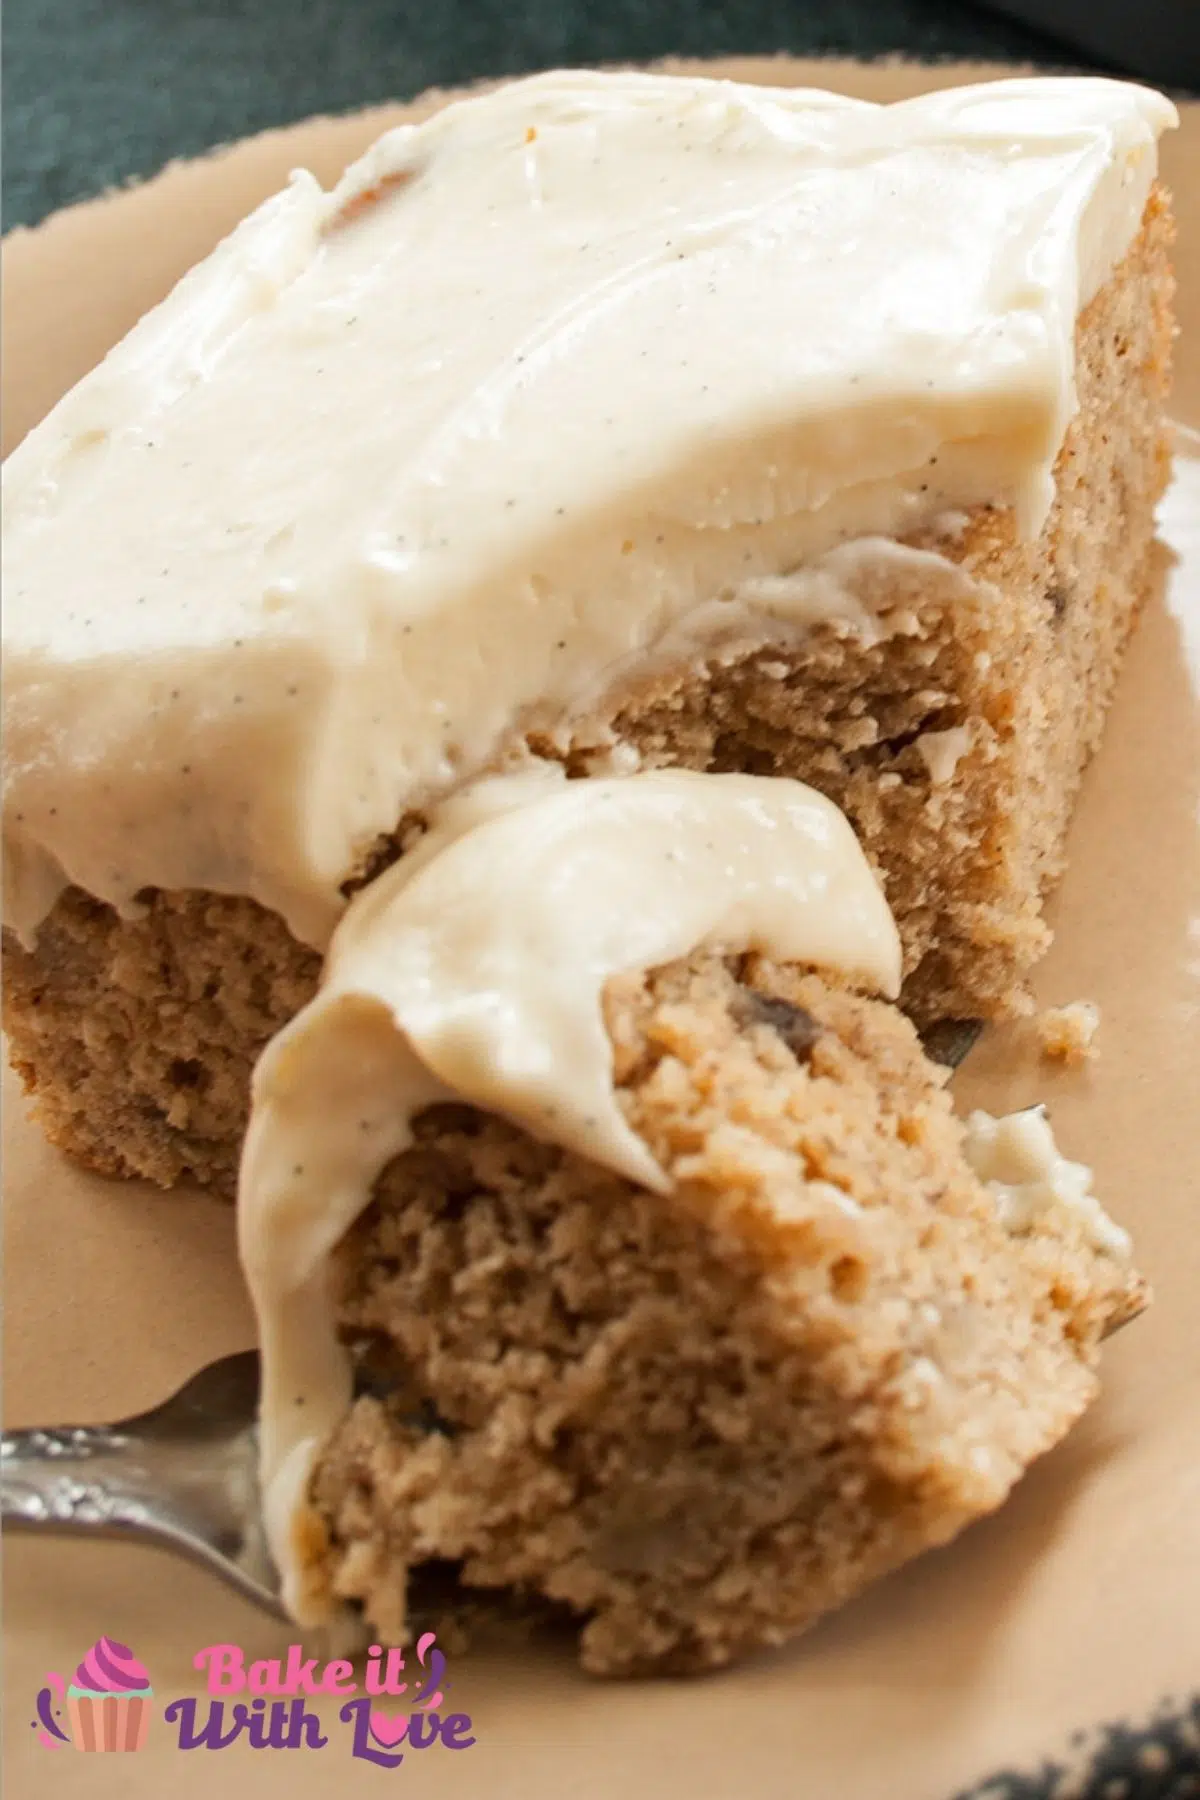 Closeup on the super moist banana cake with cream cheese frosting slice with forked bite.